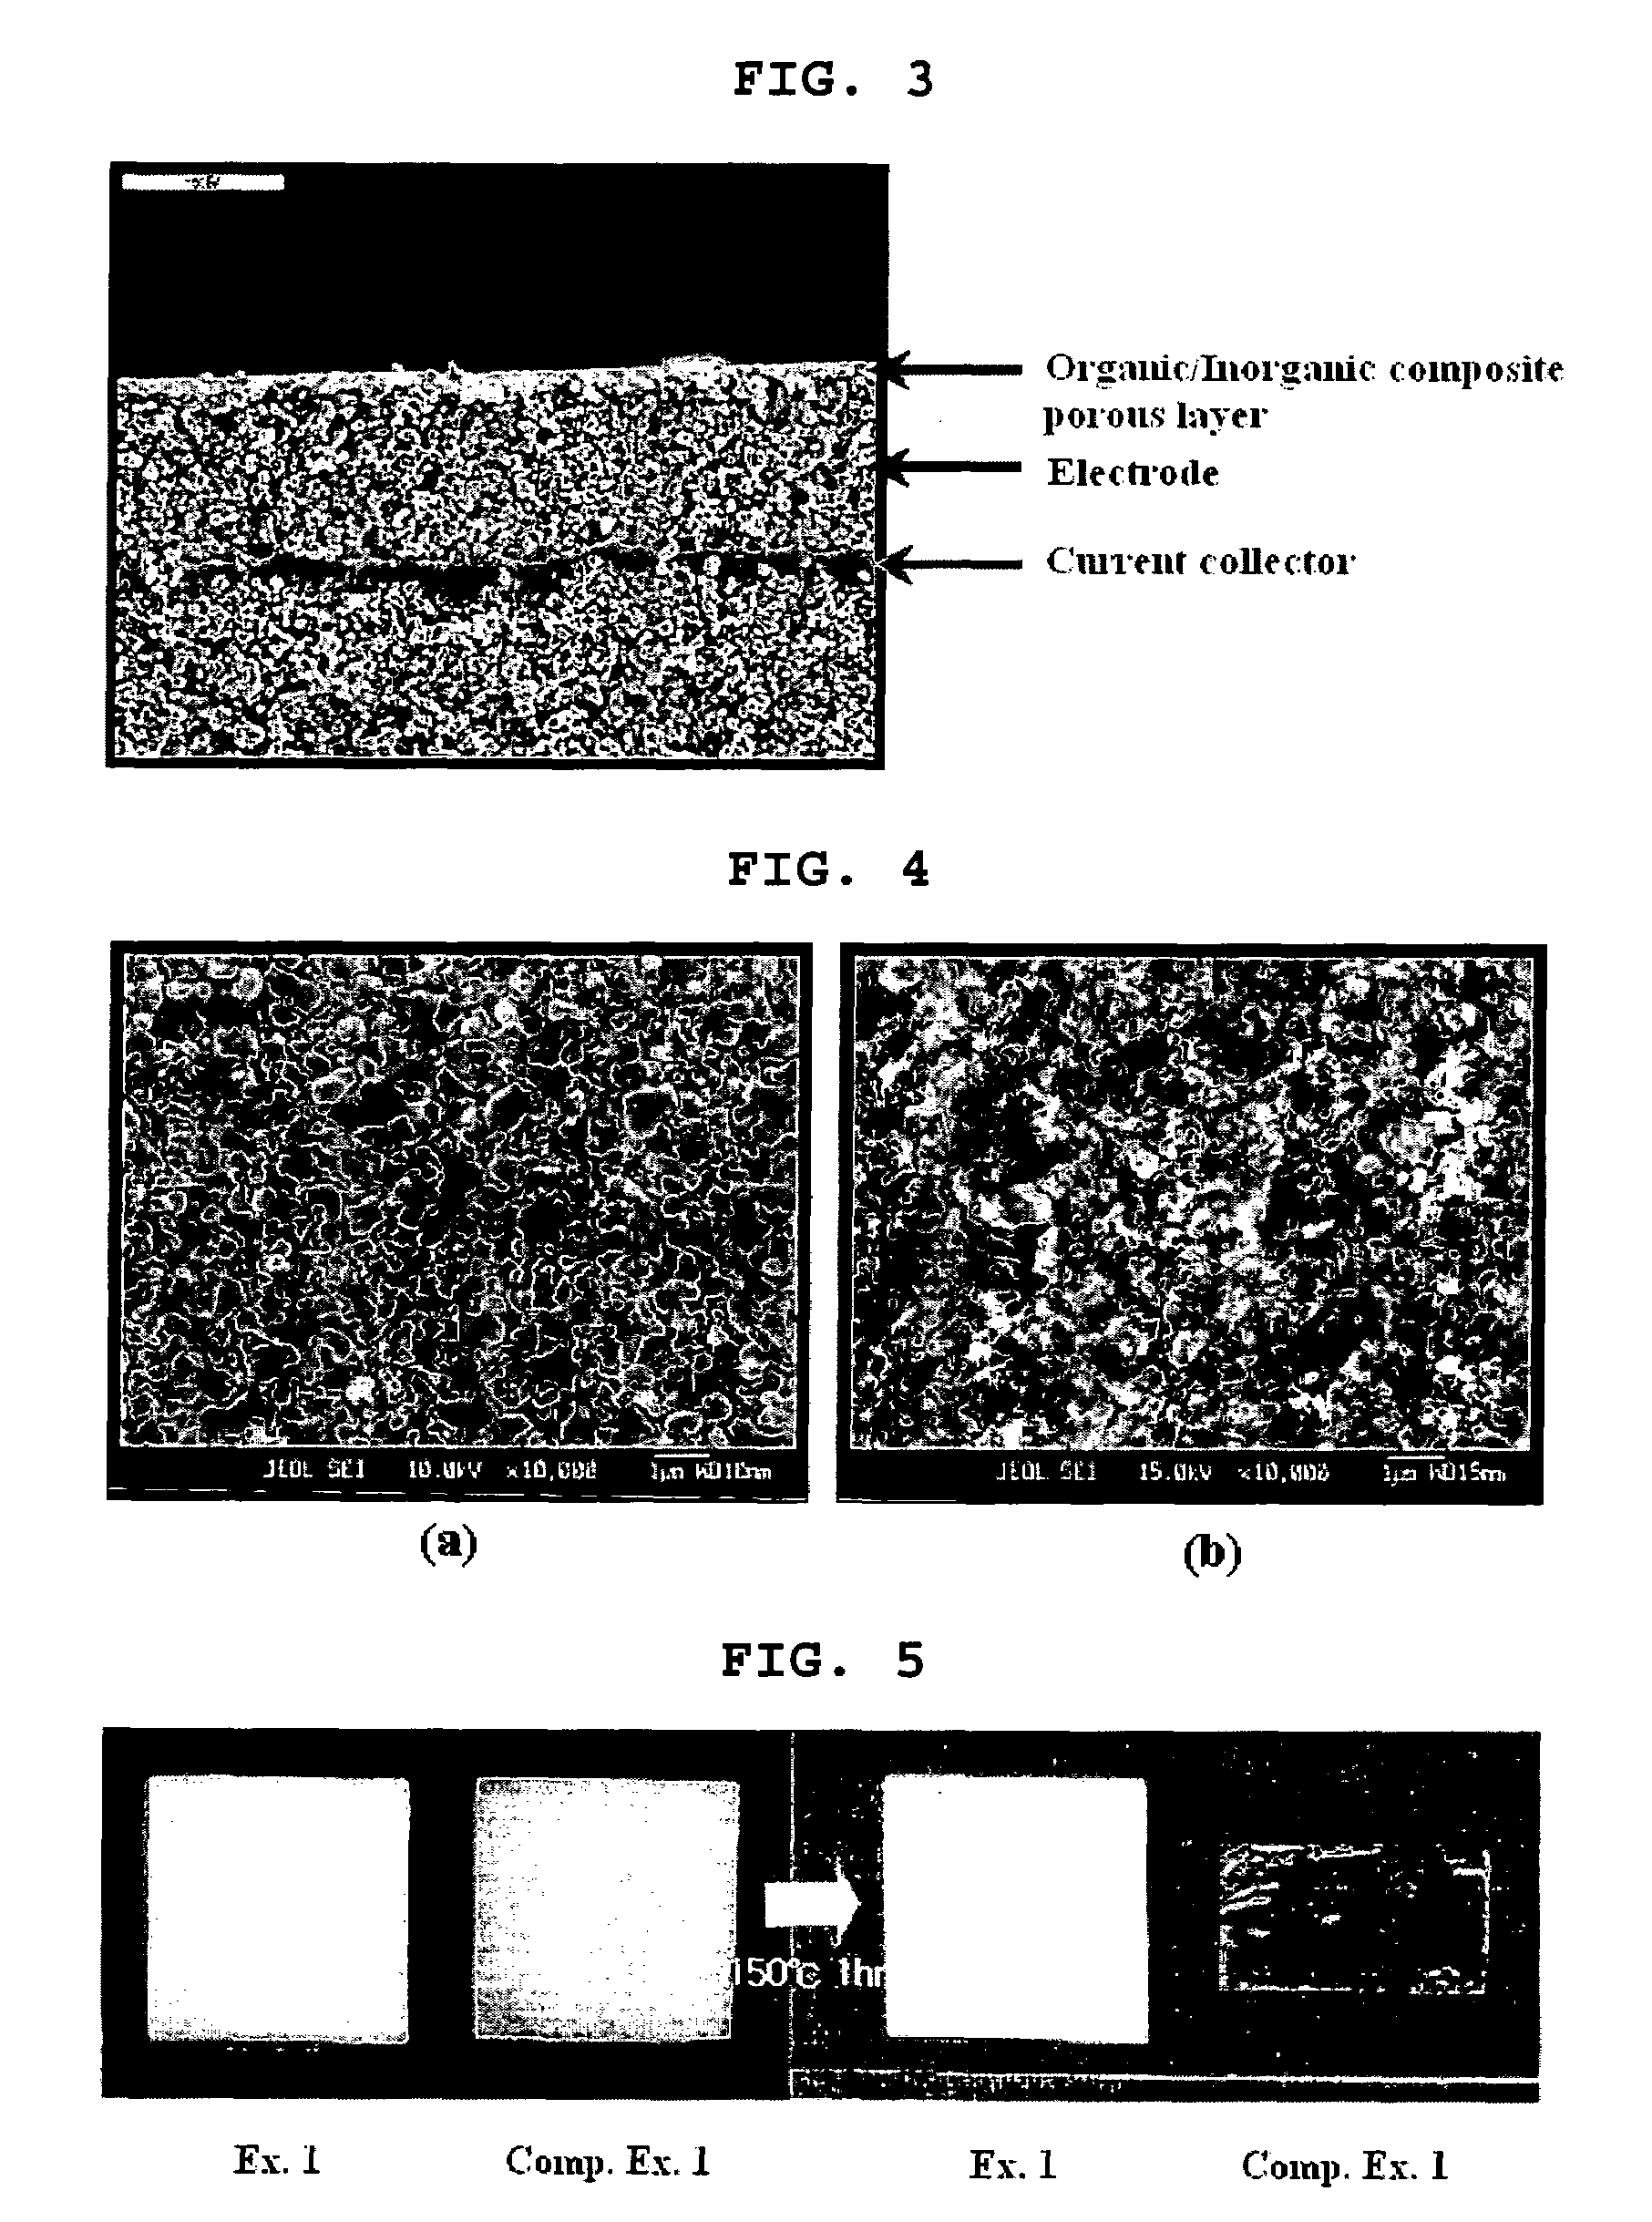 Organic/inorganic composite porous layer-coated electrode and electrochemical device comprising the same